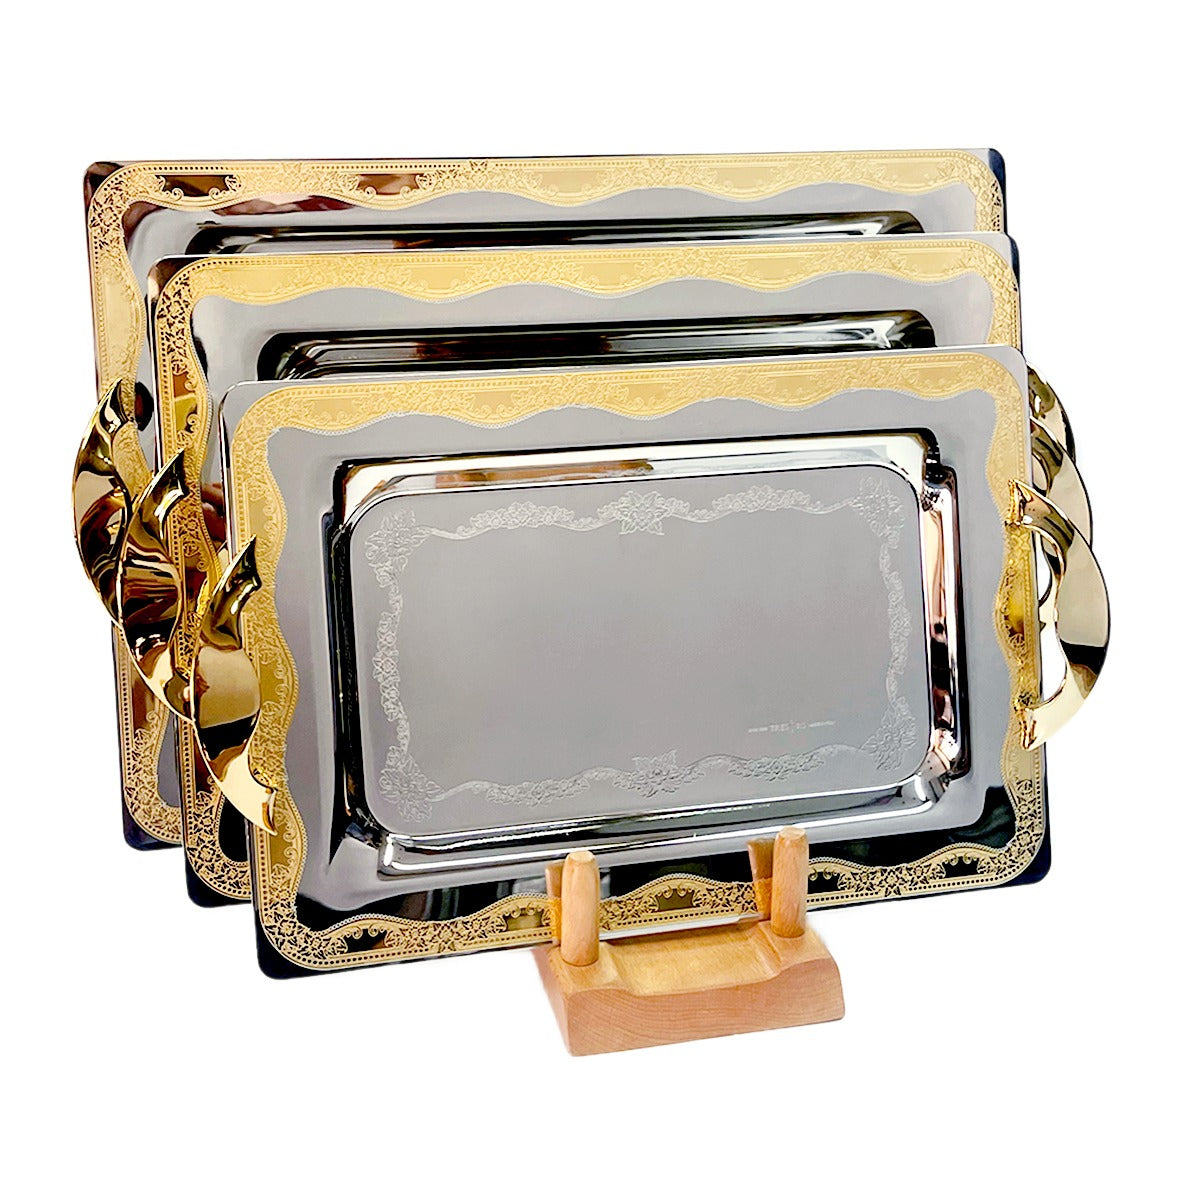 Tresors Rectangular Tray with Handles, 3 Pieces -Made in Italy -Silver & Gold -Stainless Steel 18/10